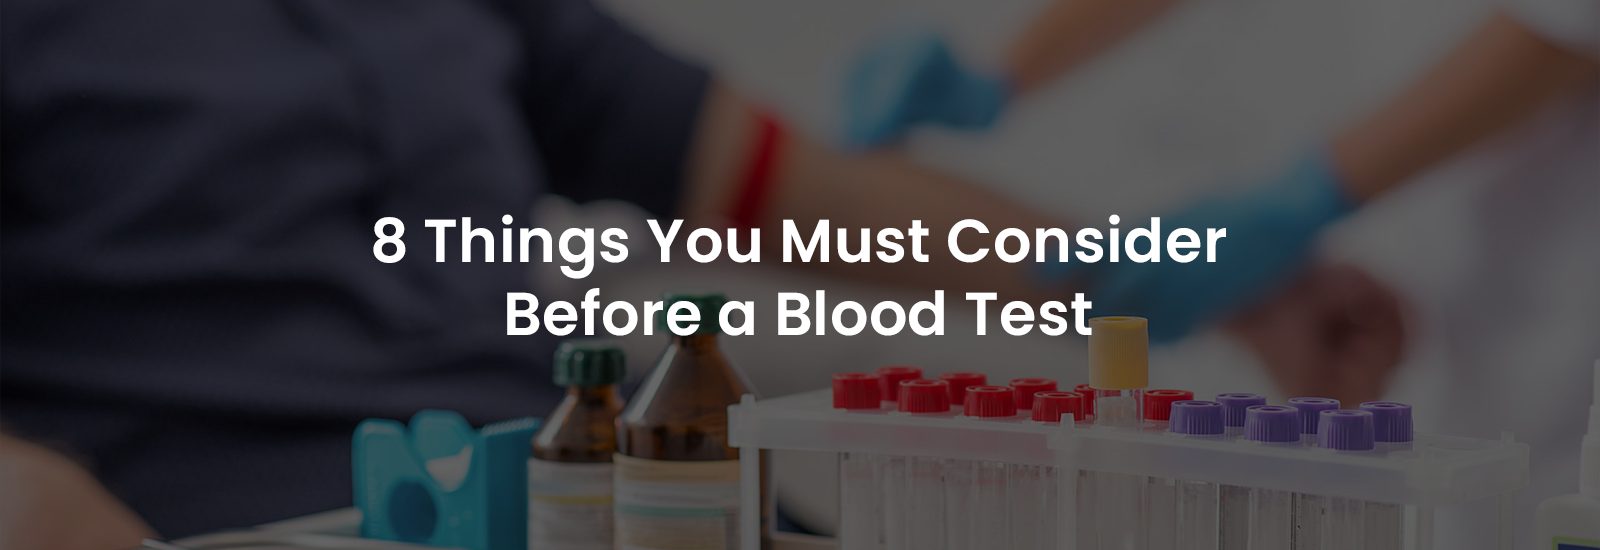 8 Things You Must Consider Before a Blood Test | Banner Image